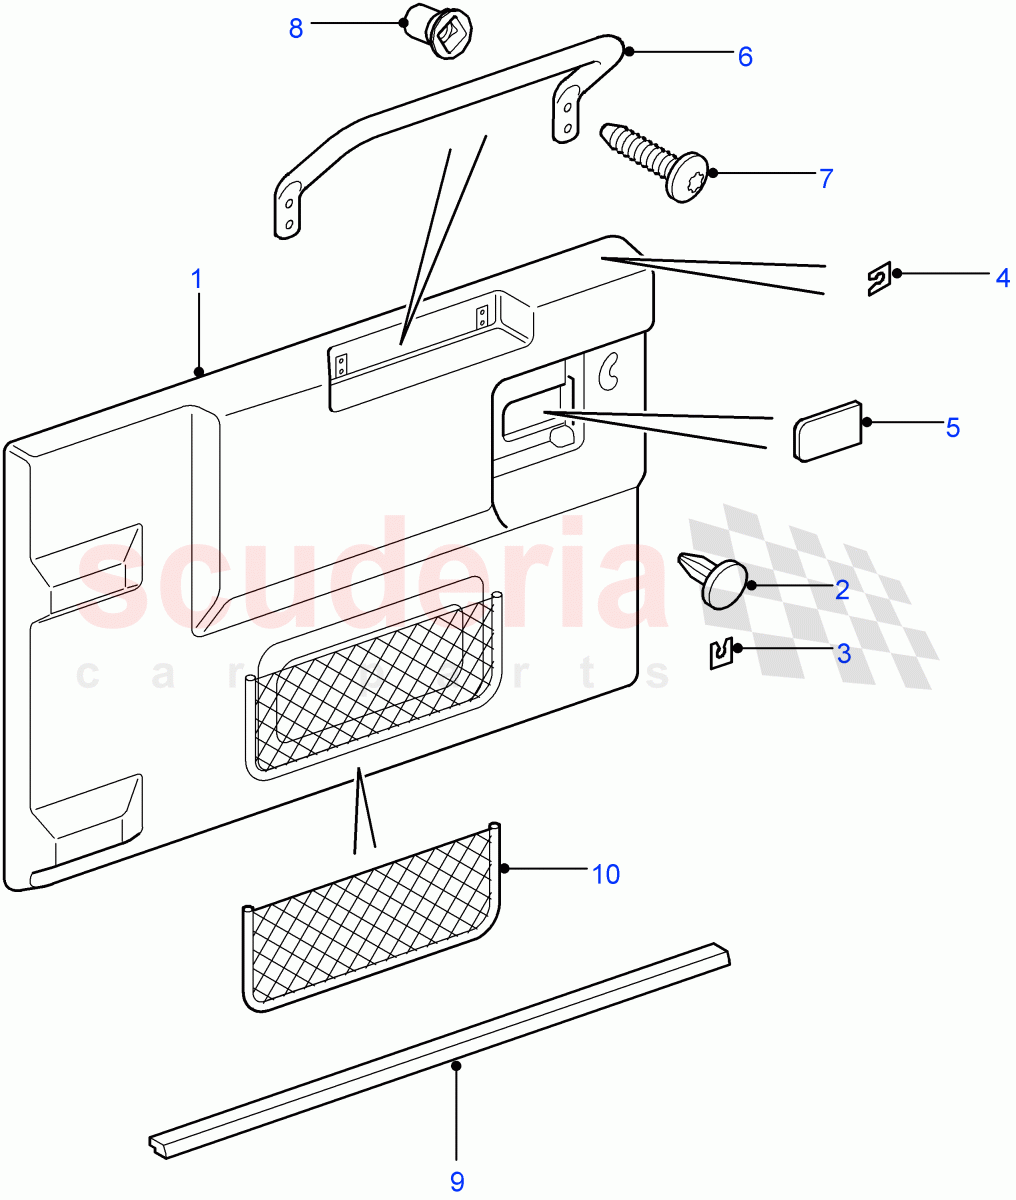 Rear End Door Casing((V)FROM7A000001) of Land Rover Land Rover Defender (2007-2016)